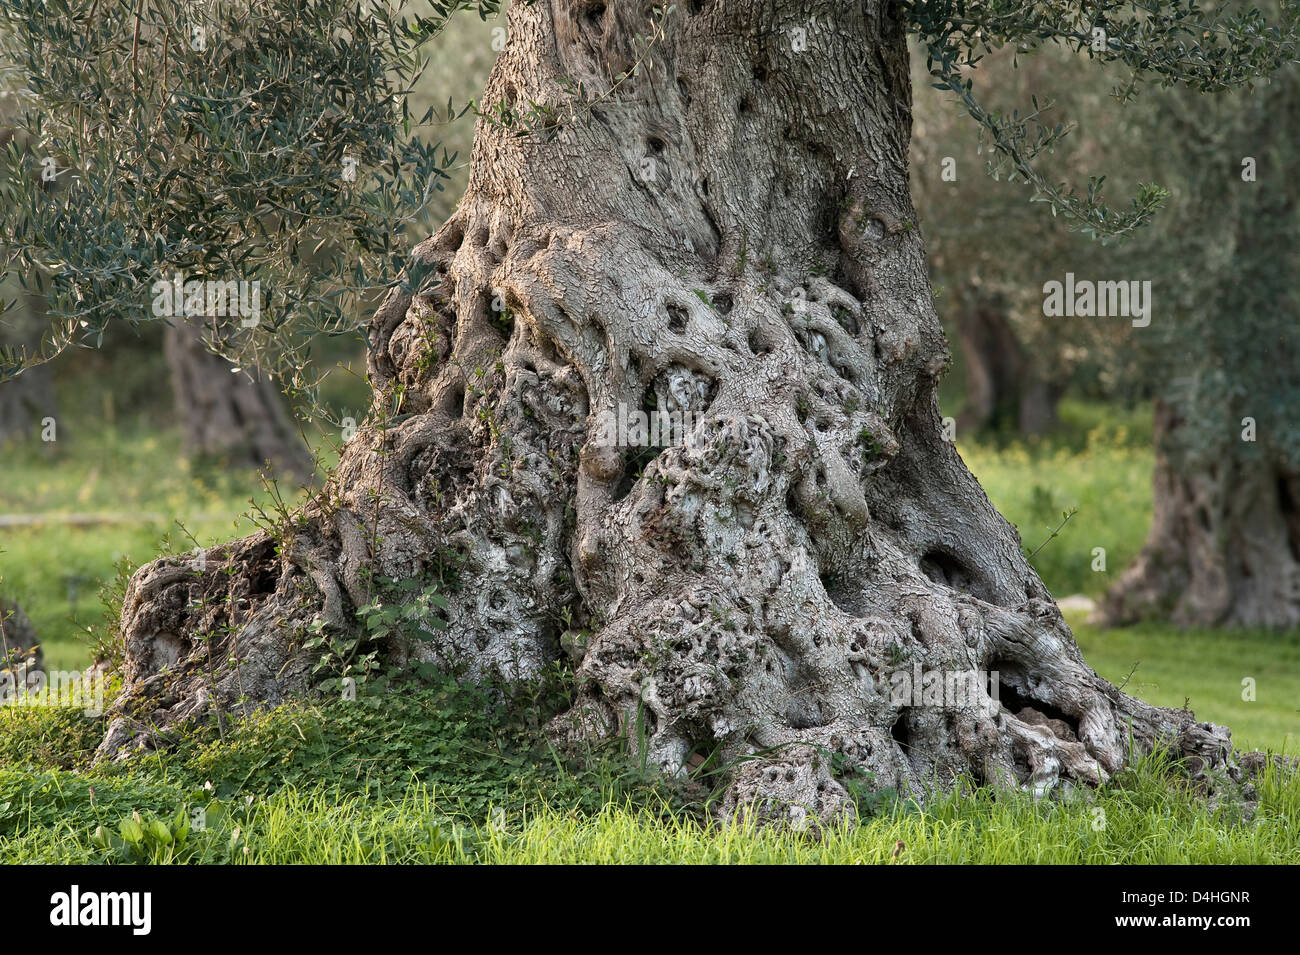 An ancient olive tree (Olea europaea) thought to have been planted 800 years ago, in an olive grove near Catania, Sicily, Italy Stock Photo